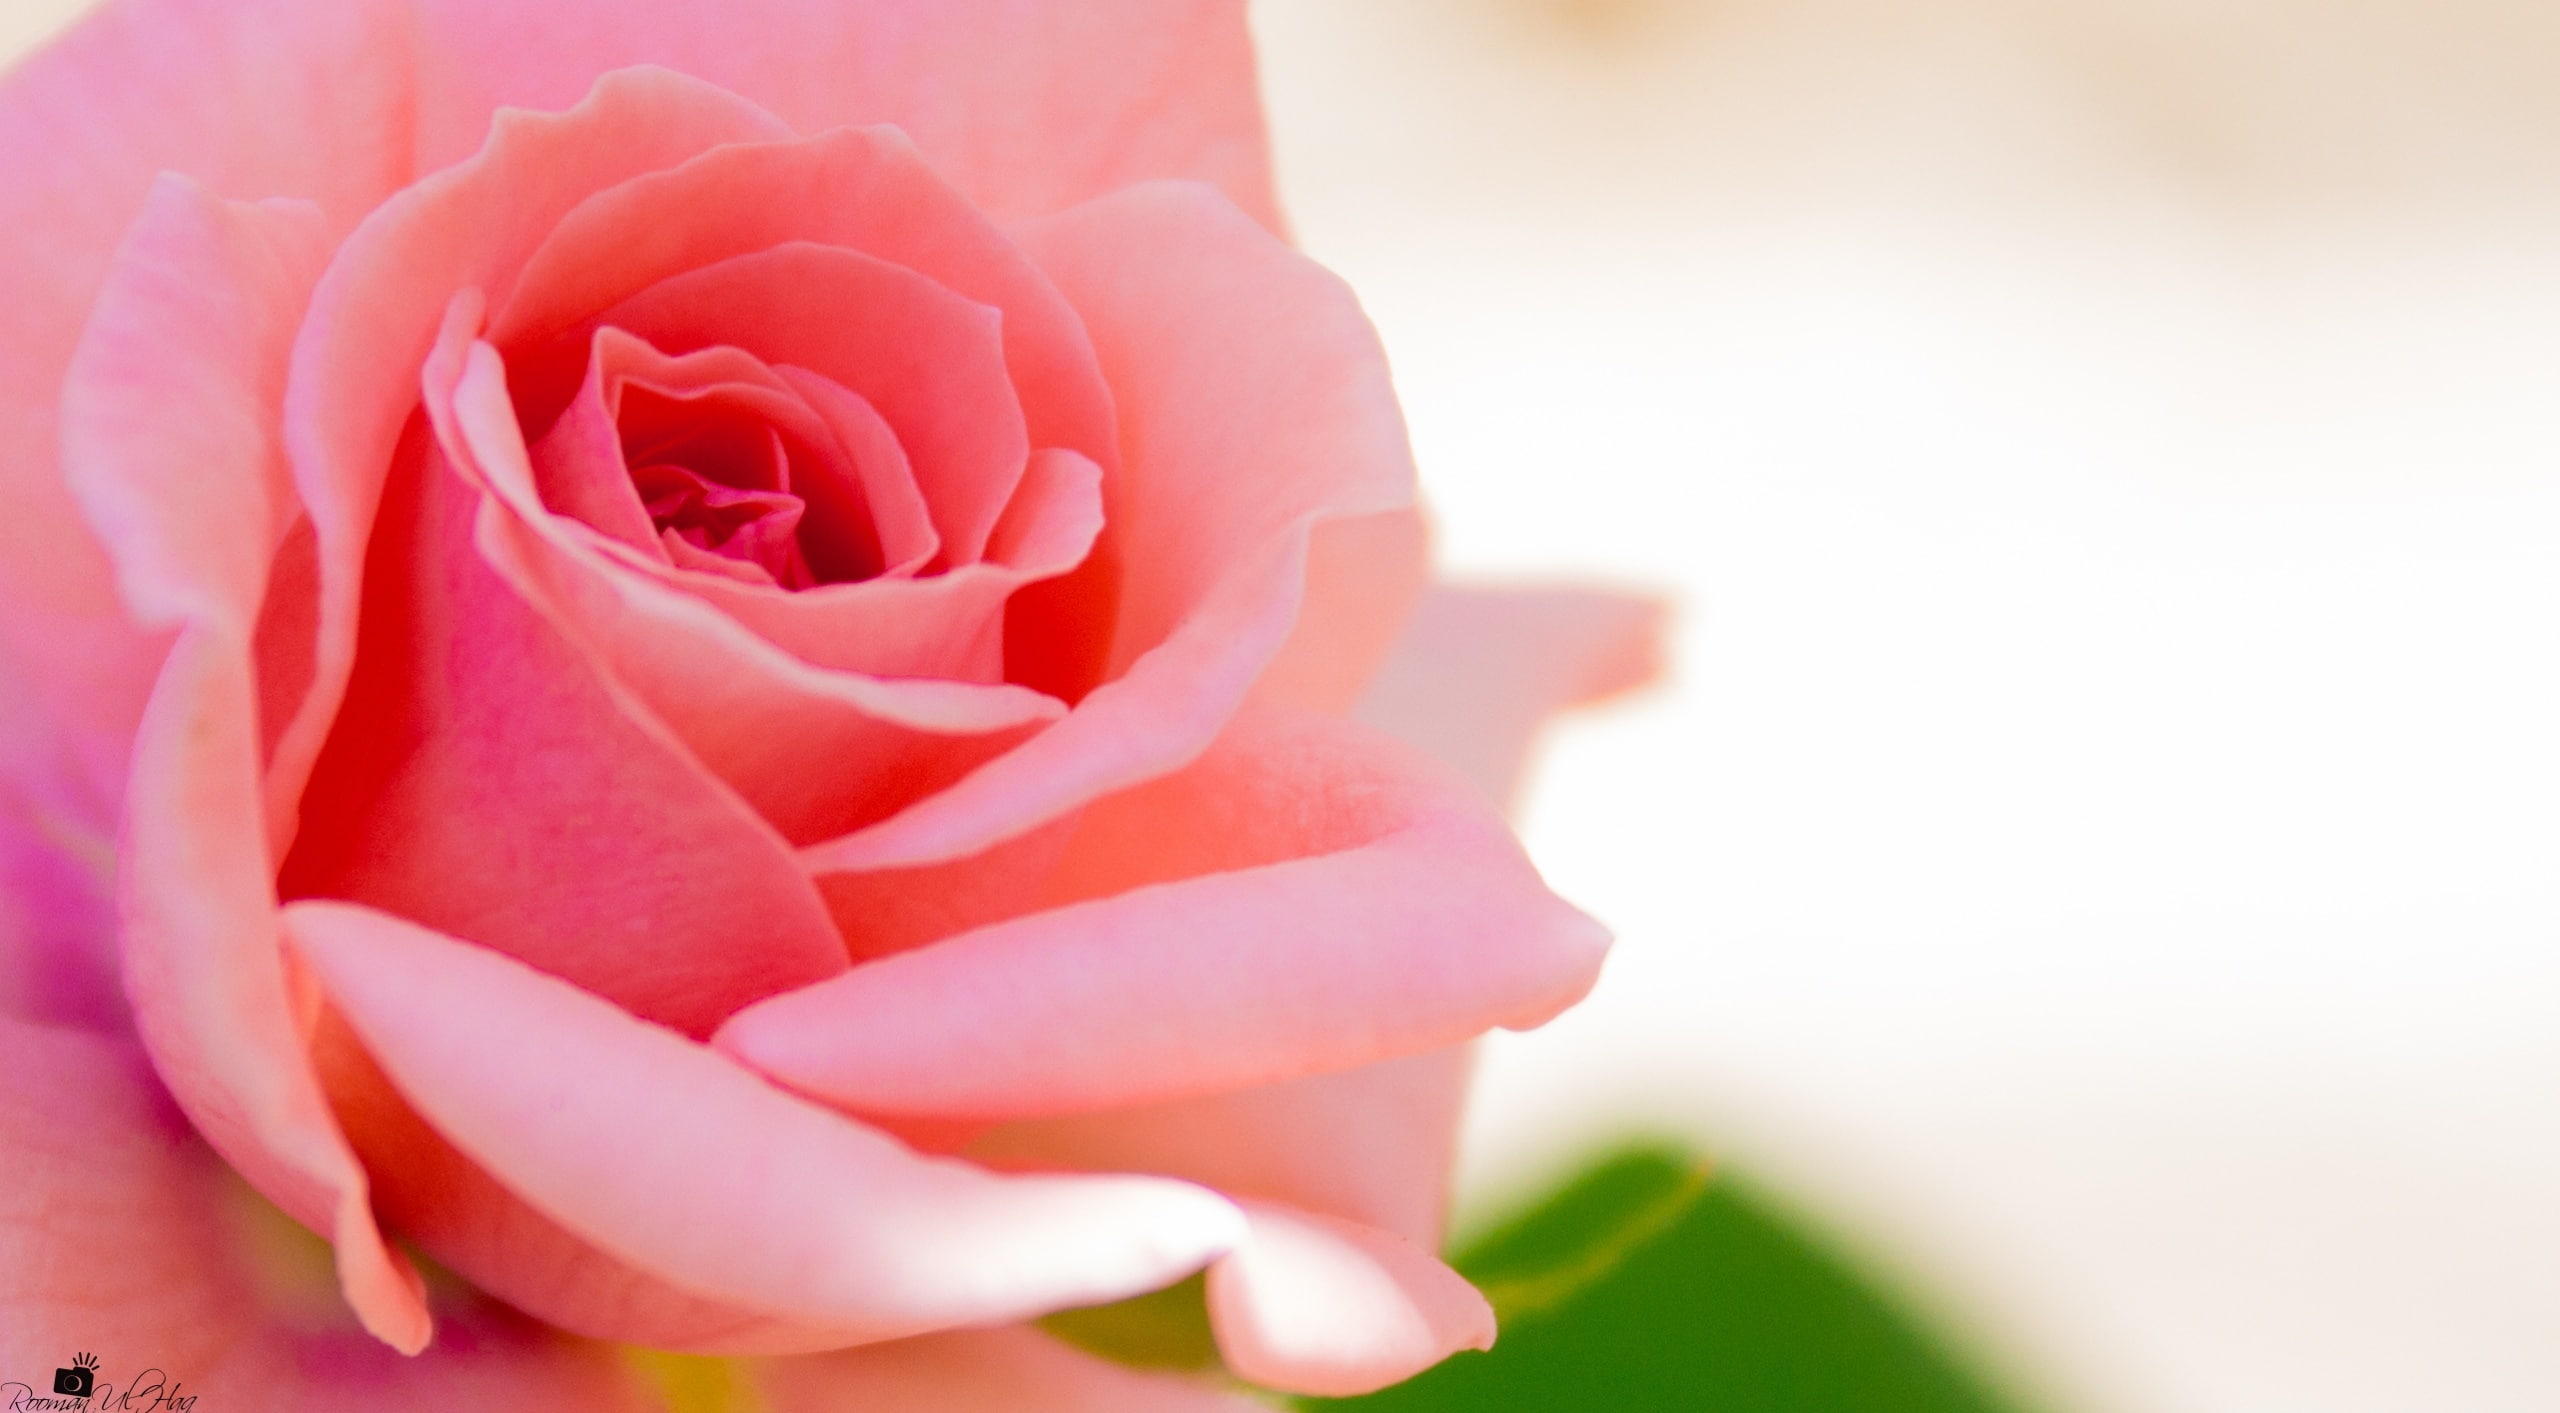 With Love From Pink, pink rose flower, Cute, beautiful, macro